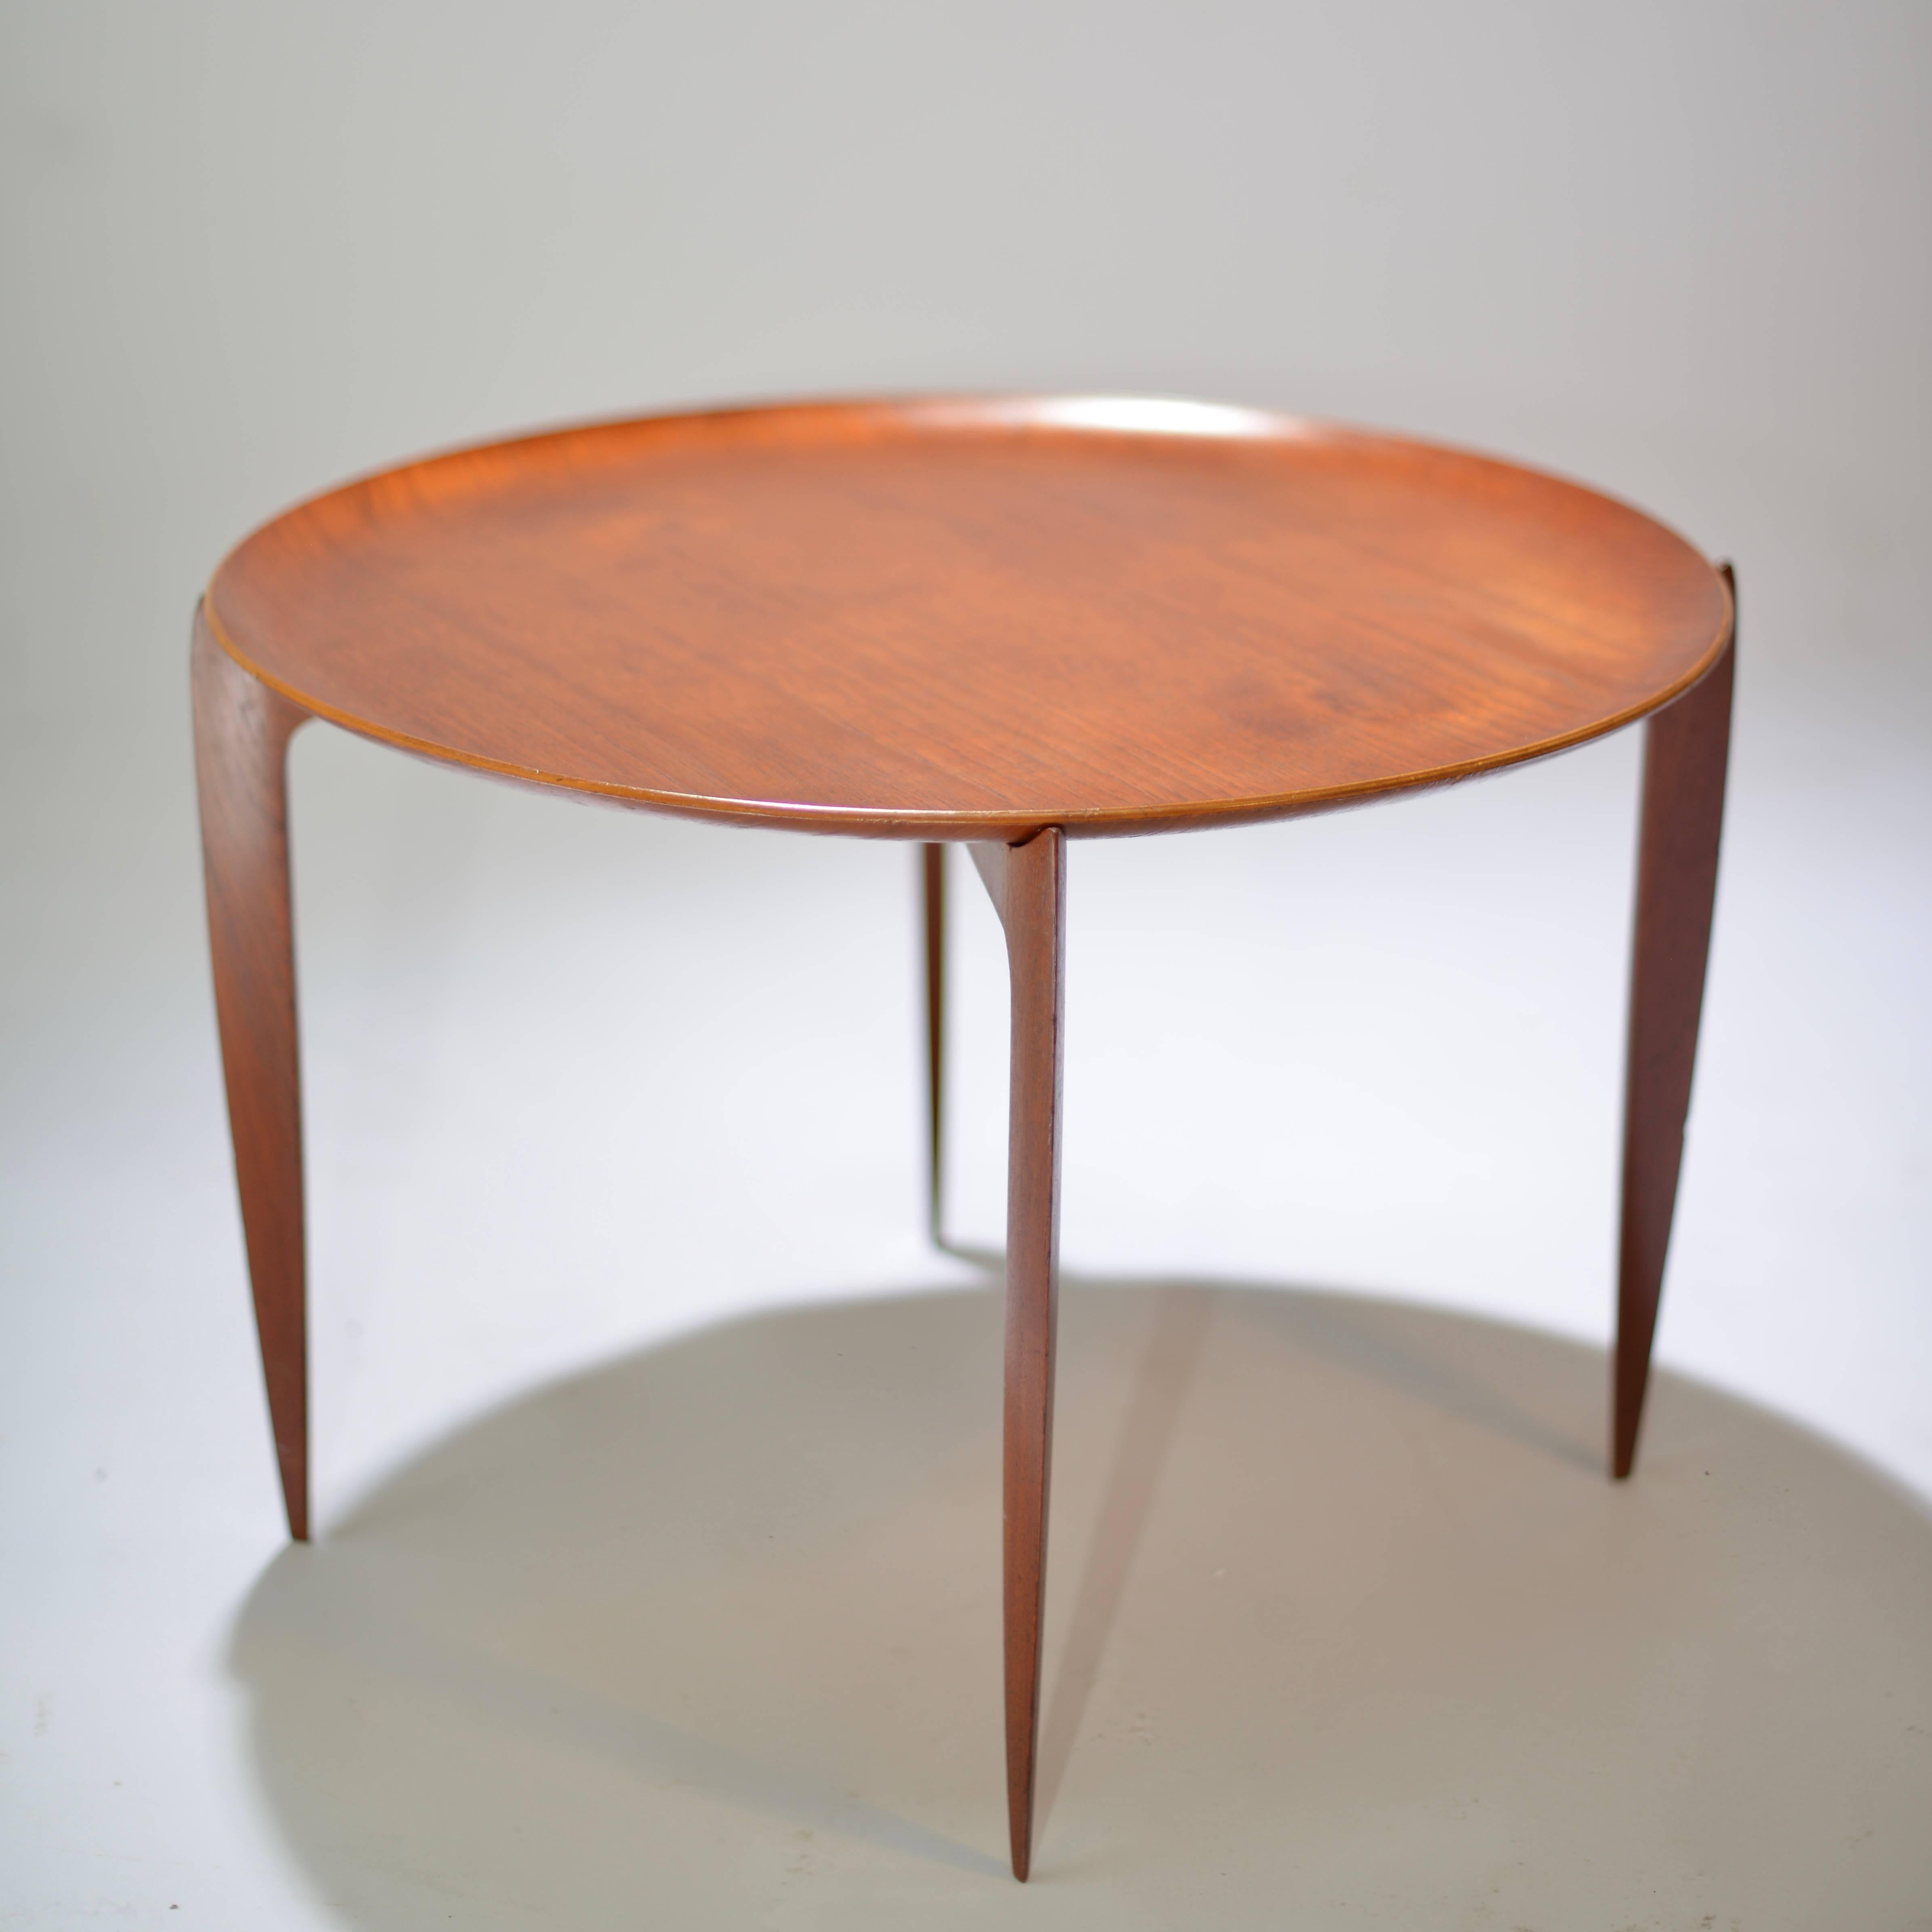 Scandinavian Modern Teak Tray Table by H Engholm and Svend Aage Willumsen for Fritz Hansen